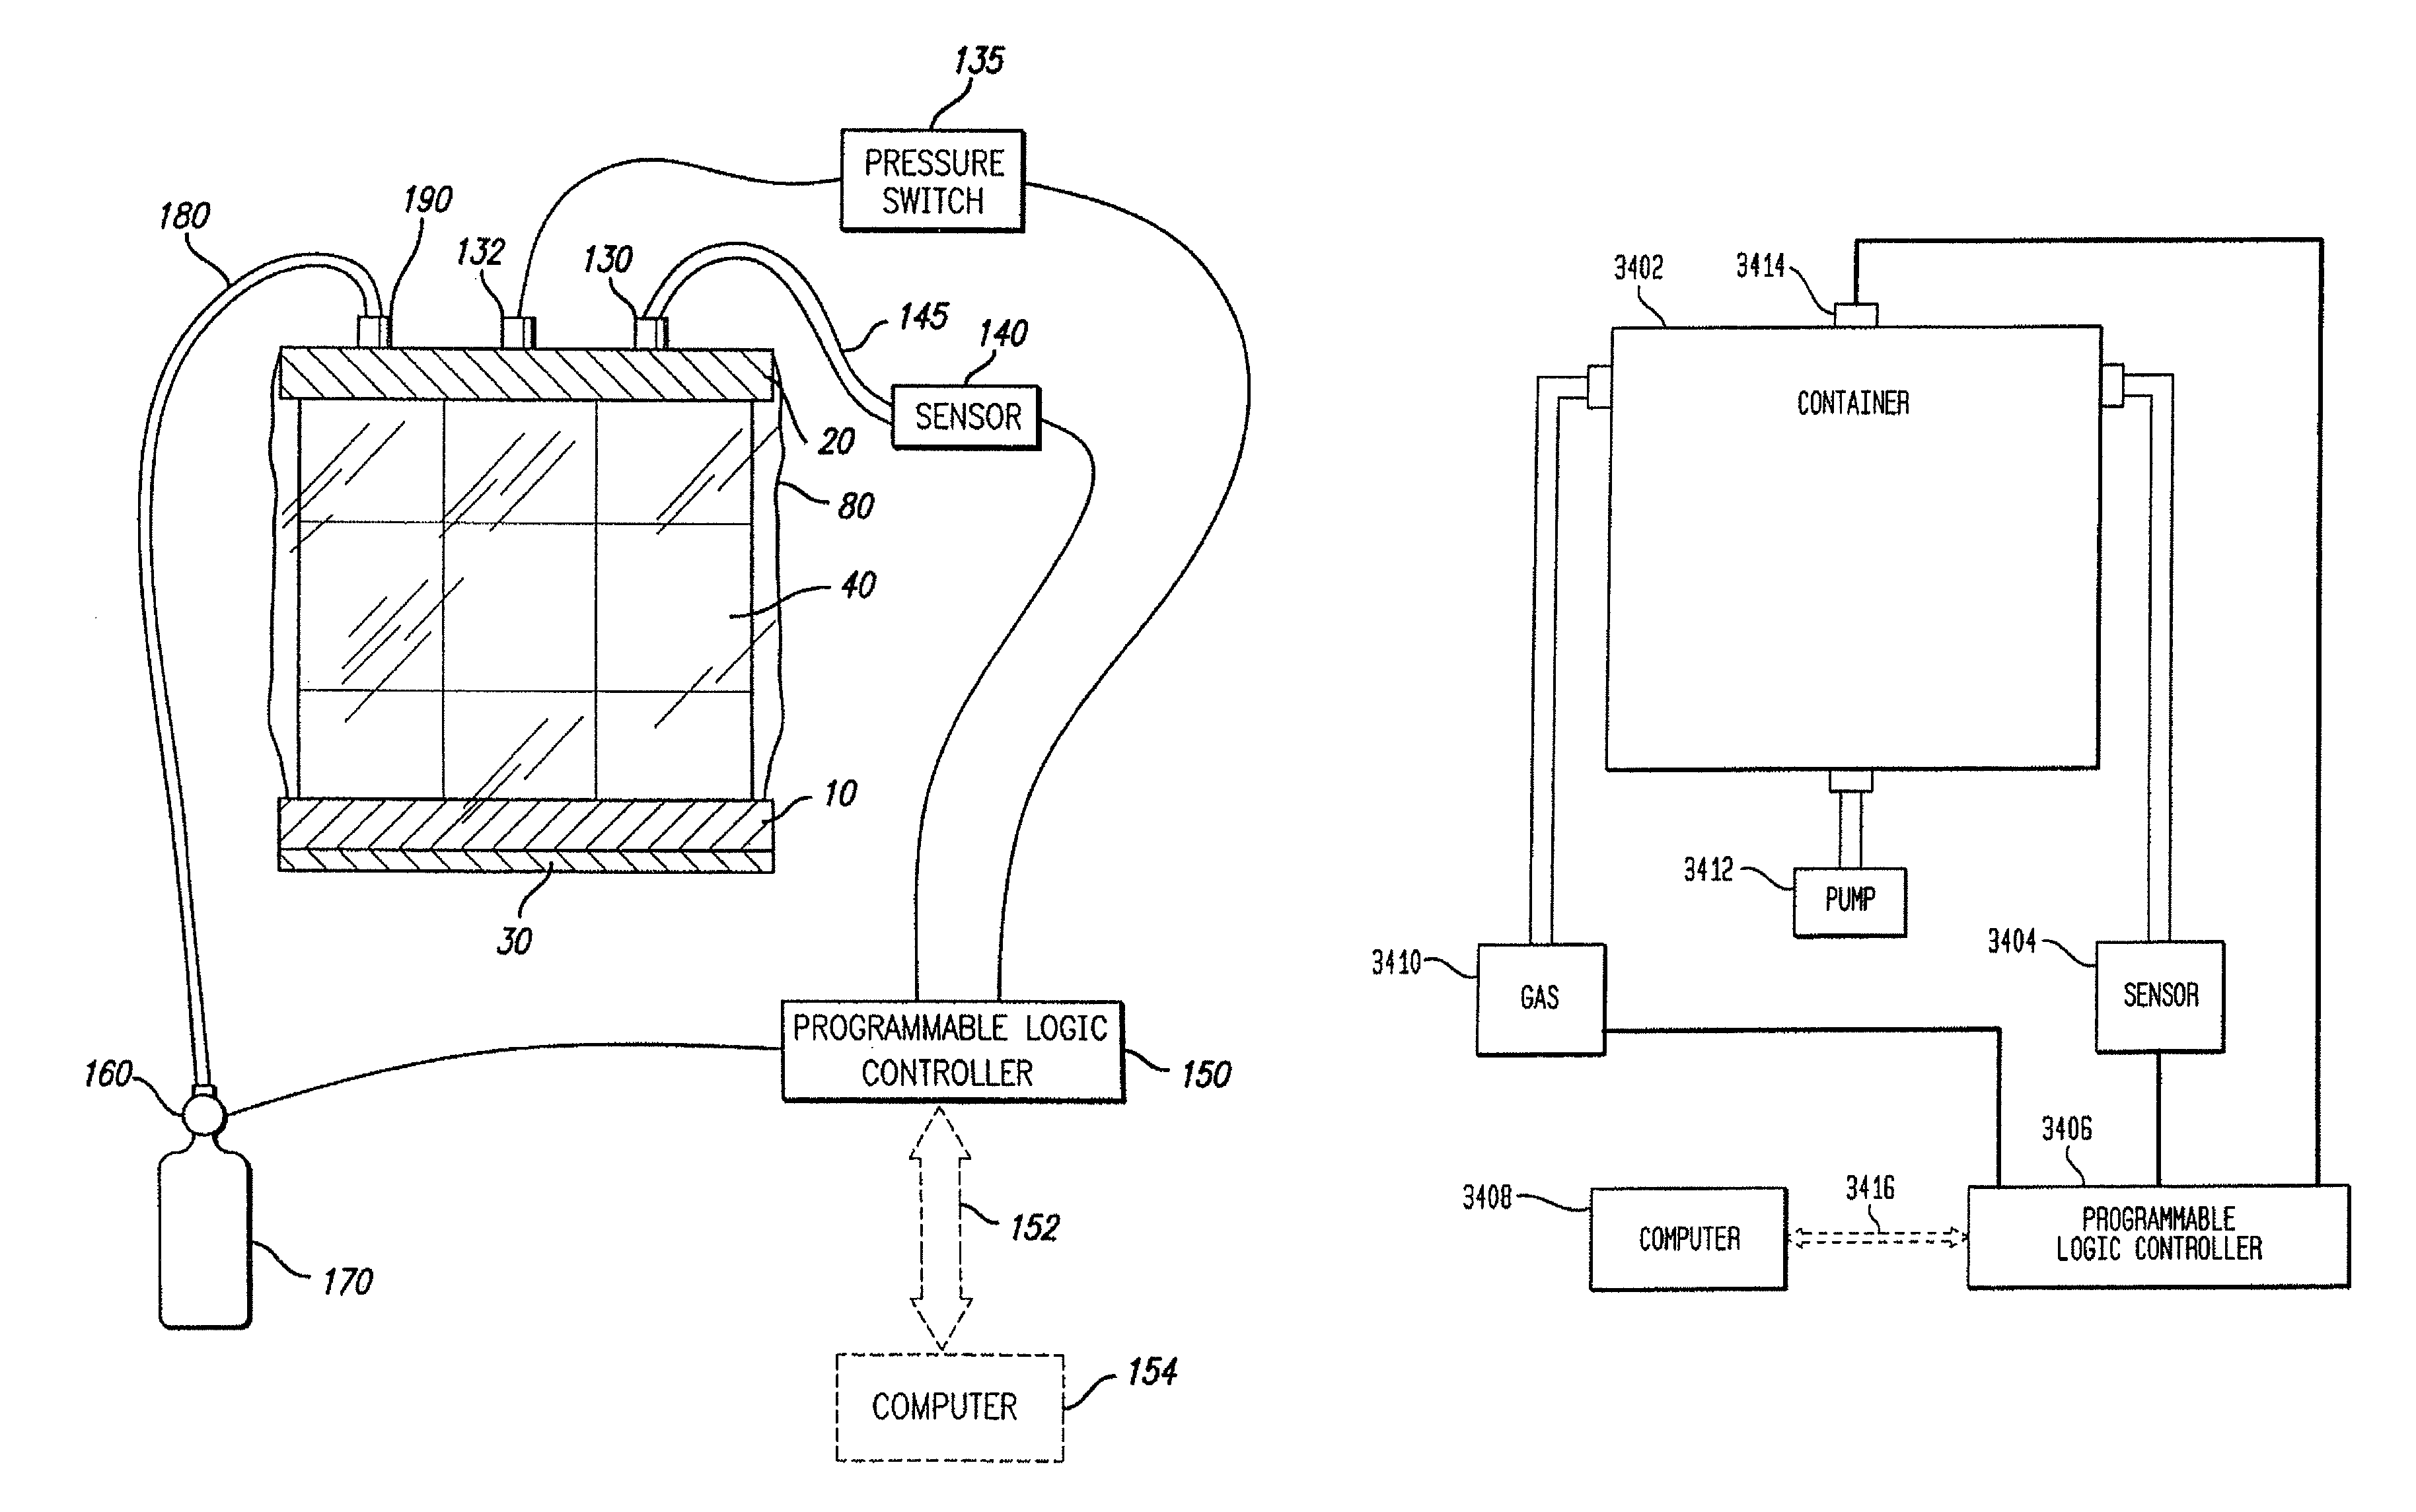 Method for providing a regulated atmosphere for packaging perishable goods